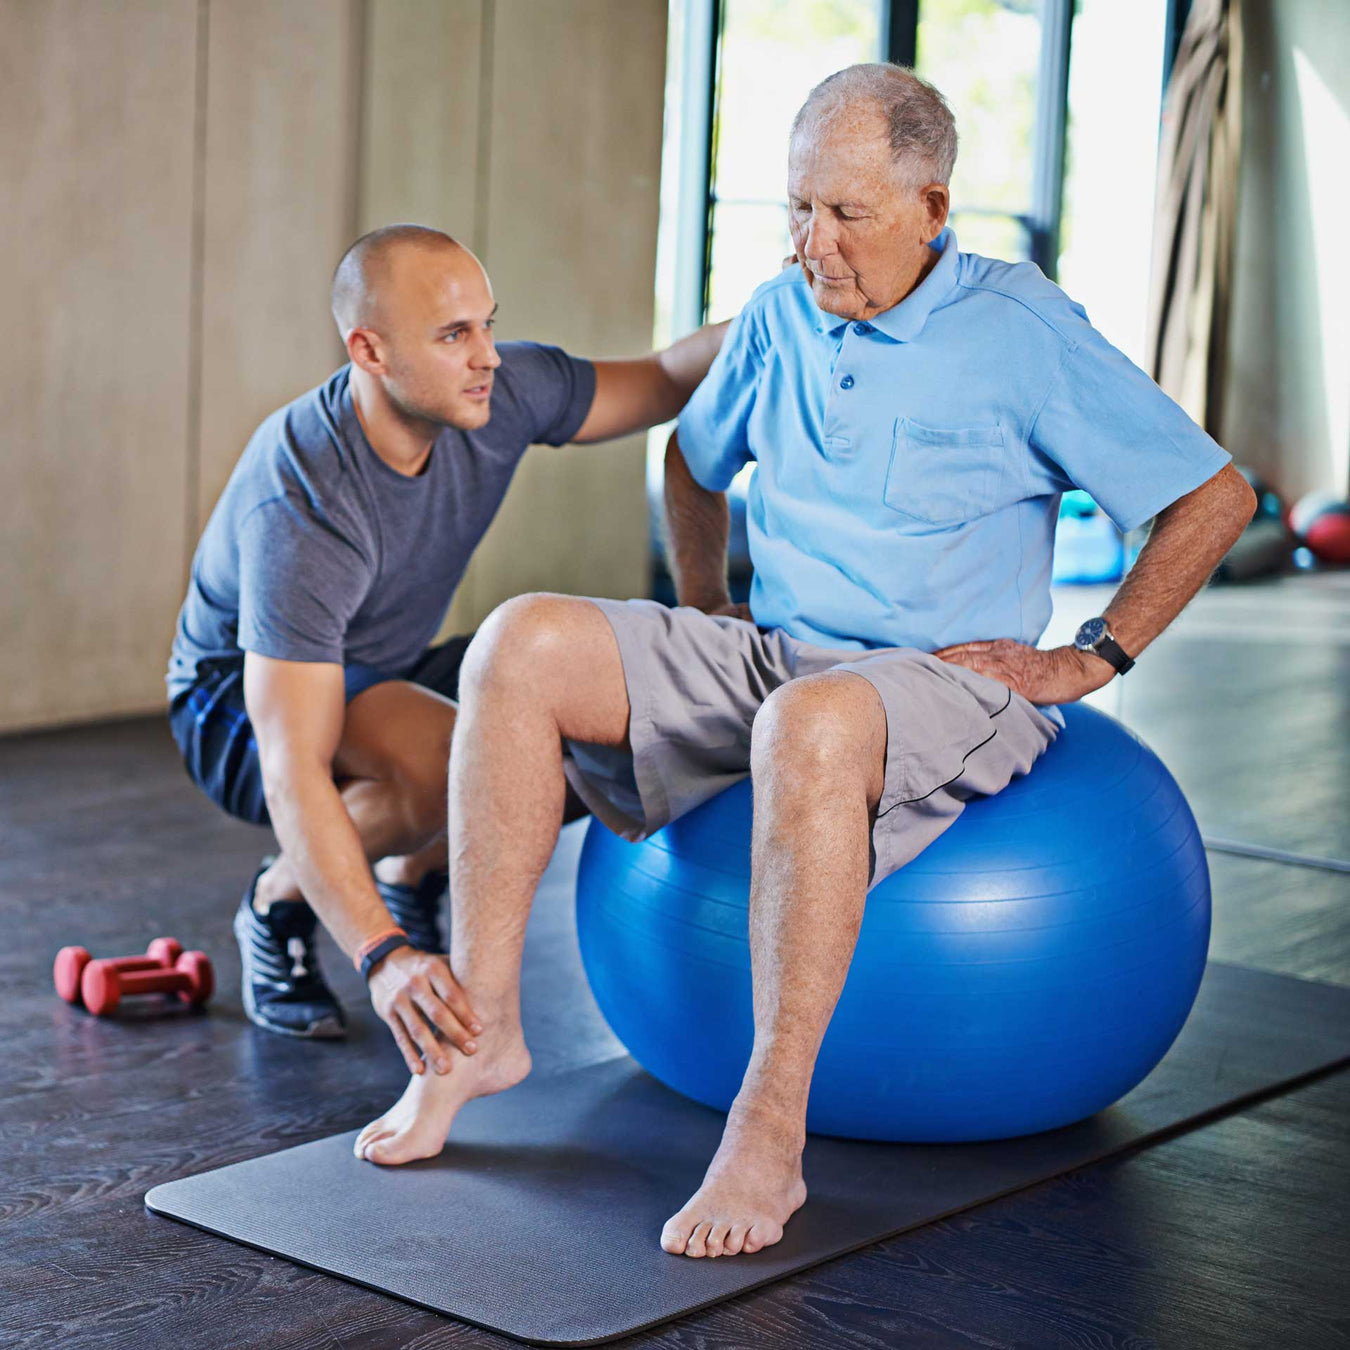 man physical therapist assists his elderly patient in rehabilitation exercises